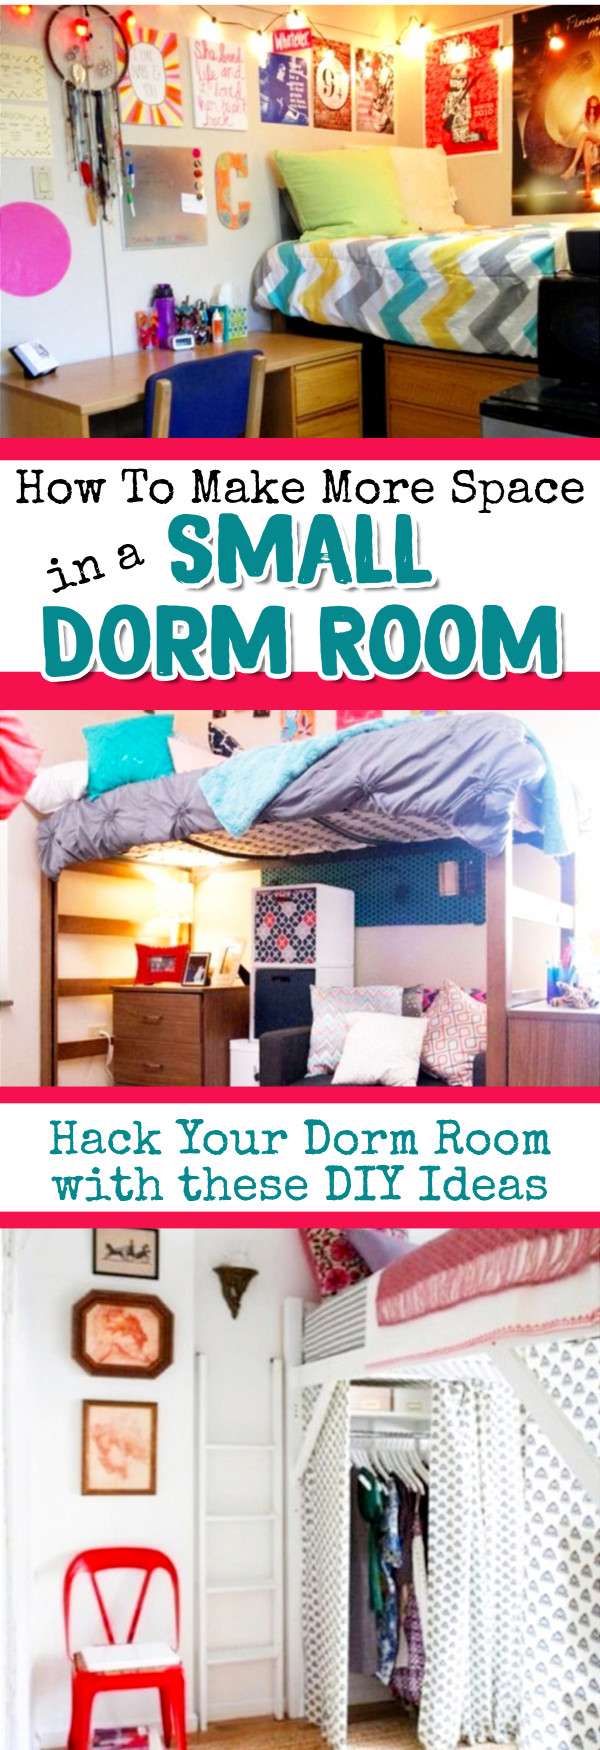 DIY Dorm Room Ideas for Small Dorm Rooms -  Creative Ways to Maximize space and make more room in a small dorm room